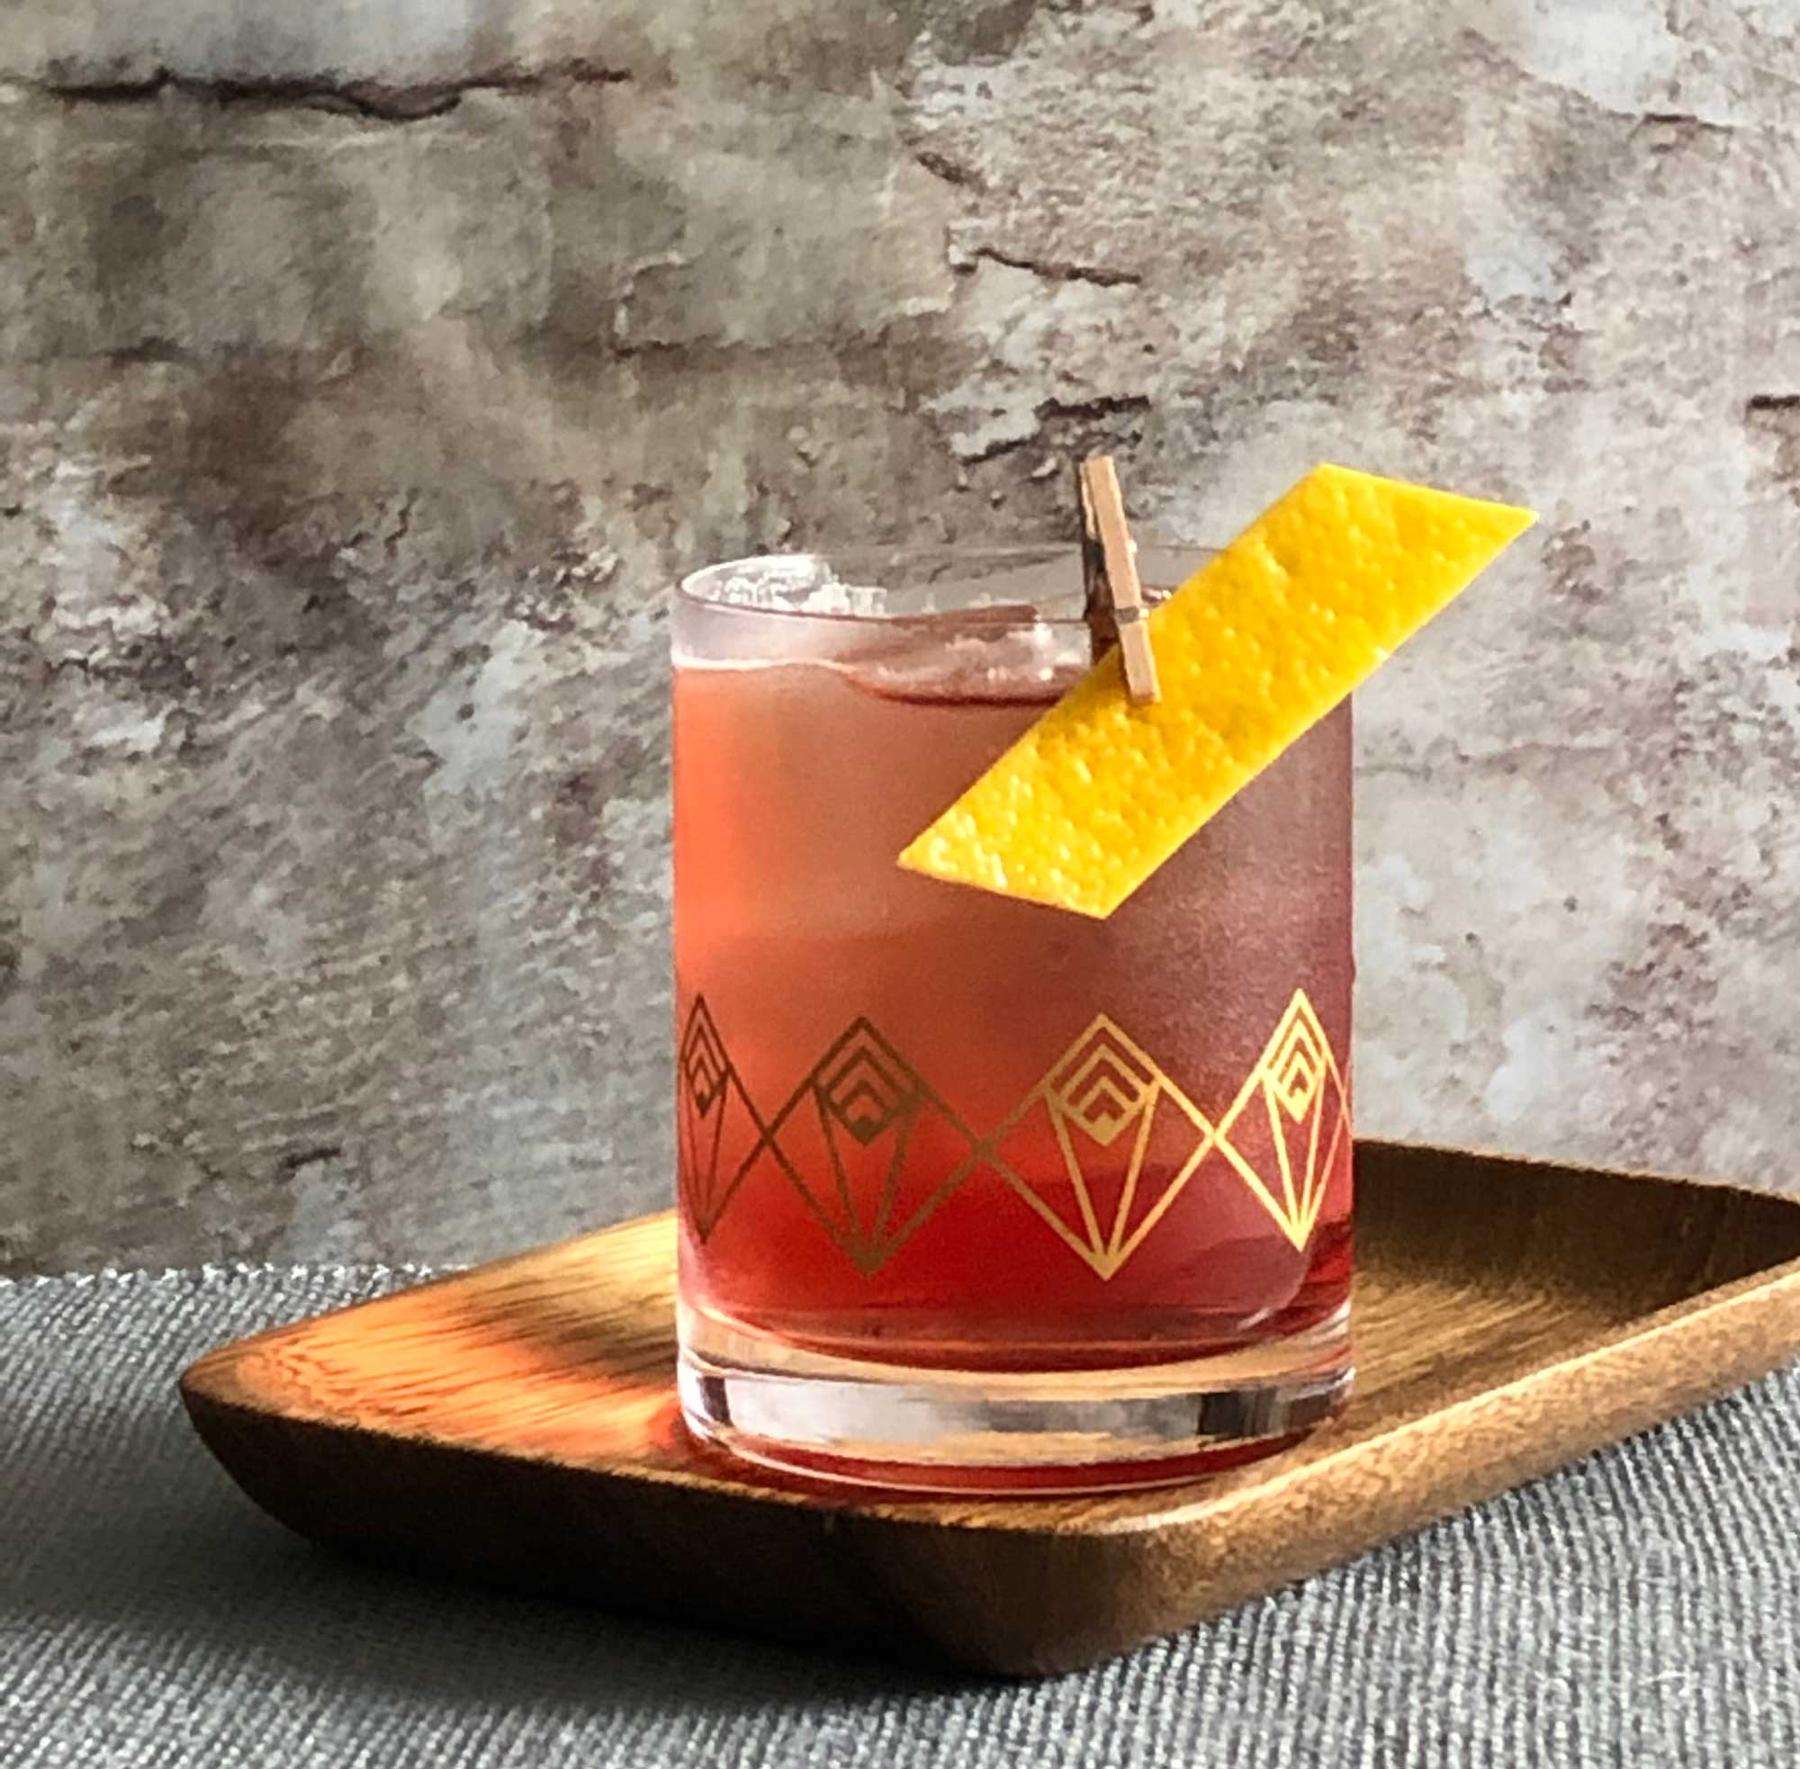 An example of the Refreshed Rosa, the mixed drink (drink) featuring Cocchi Americano Rosa, Dolin Blanc Vermouth de Chambéry, india pale ale, and lemon twist; photo by Lee Edwards